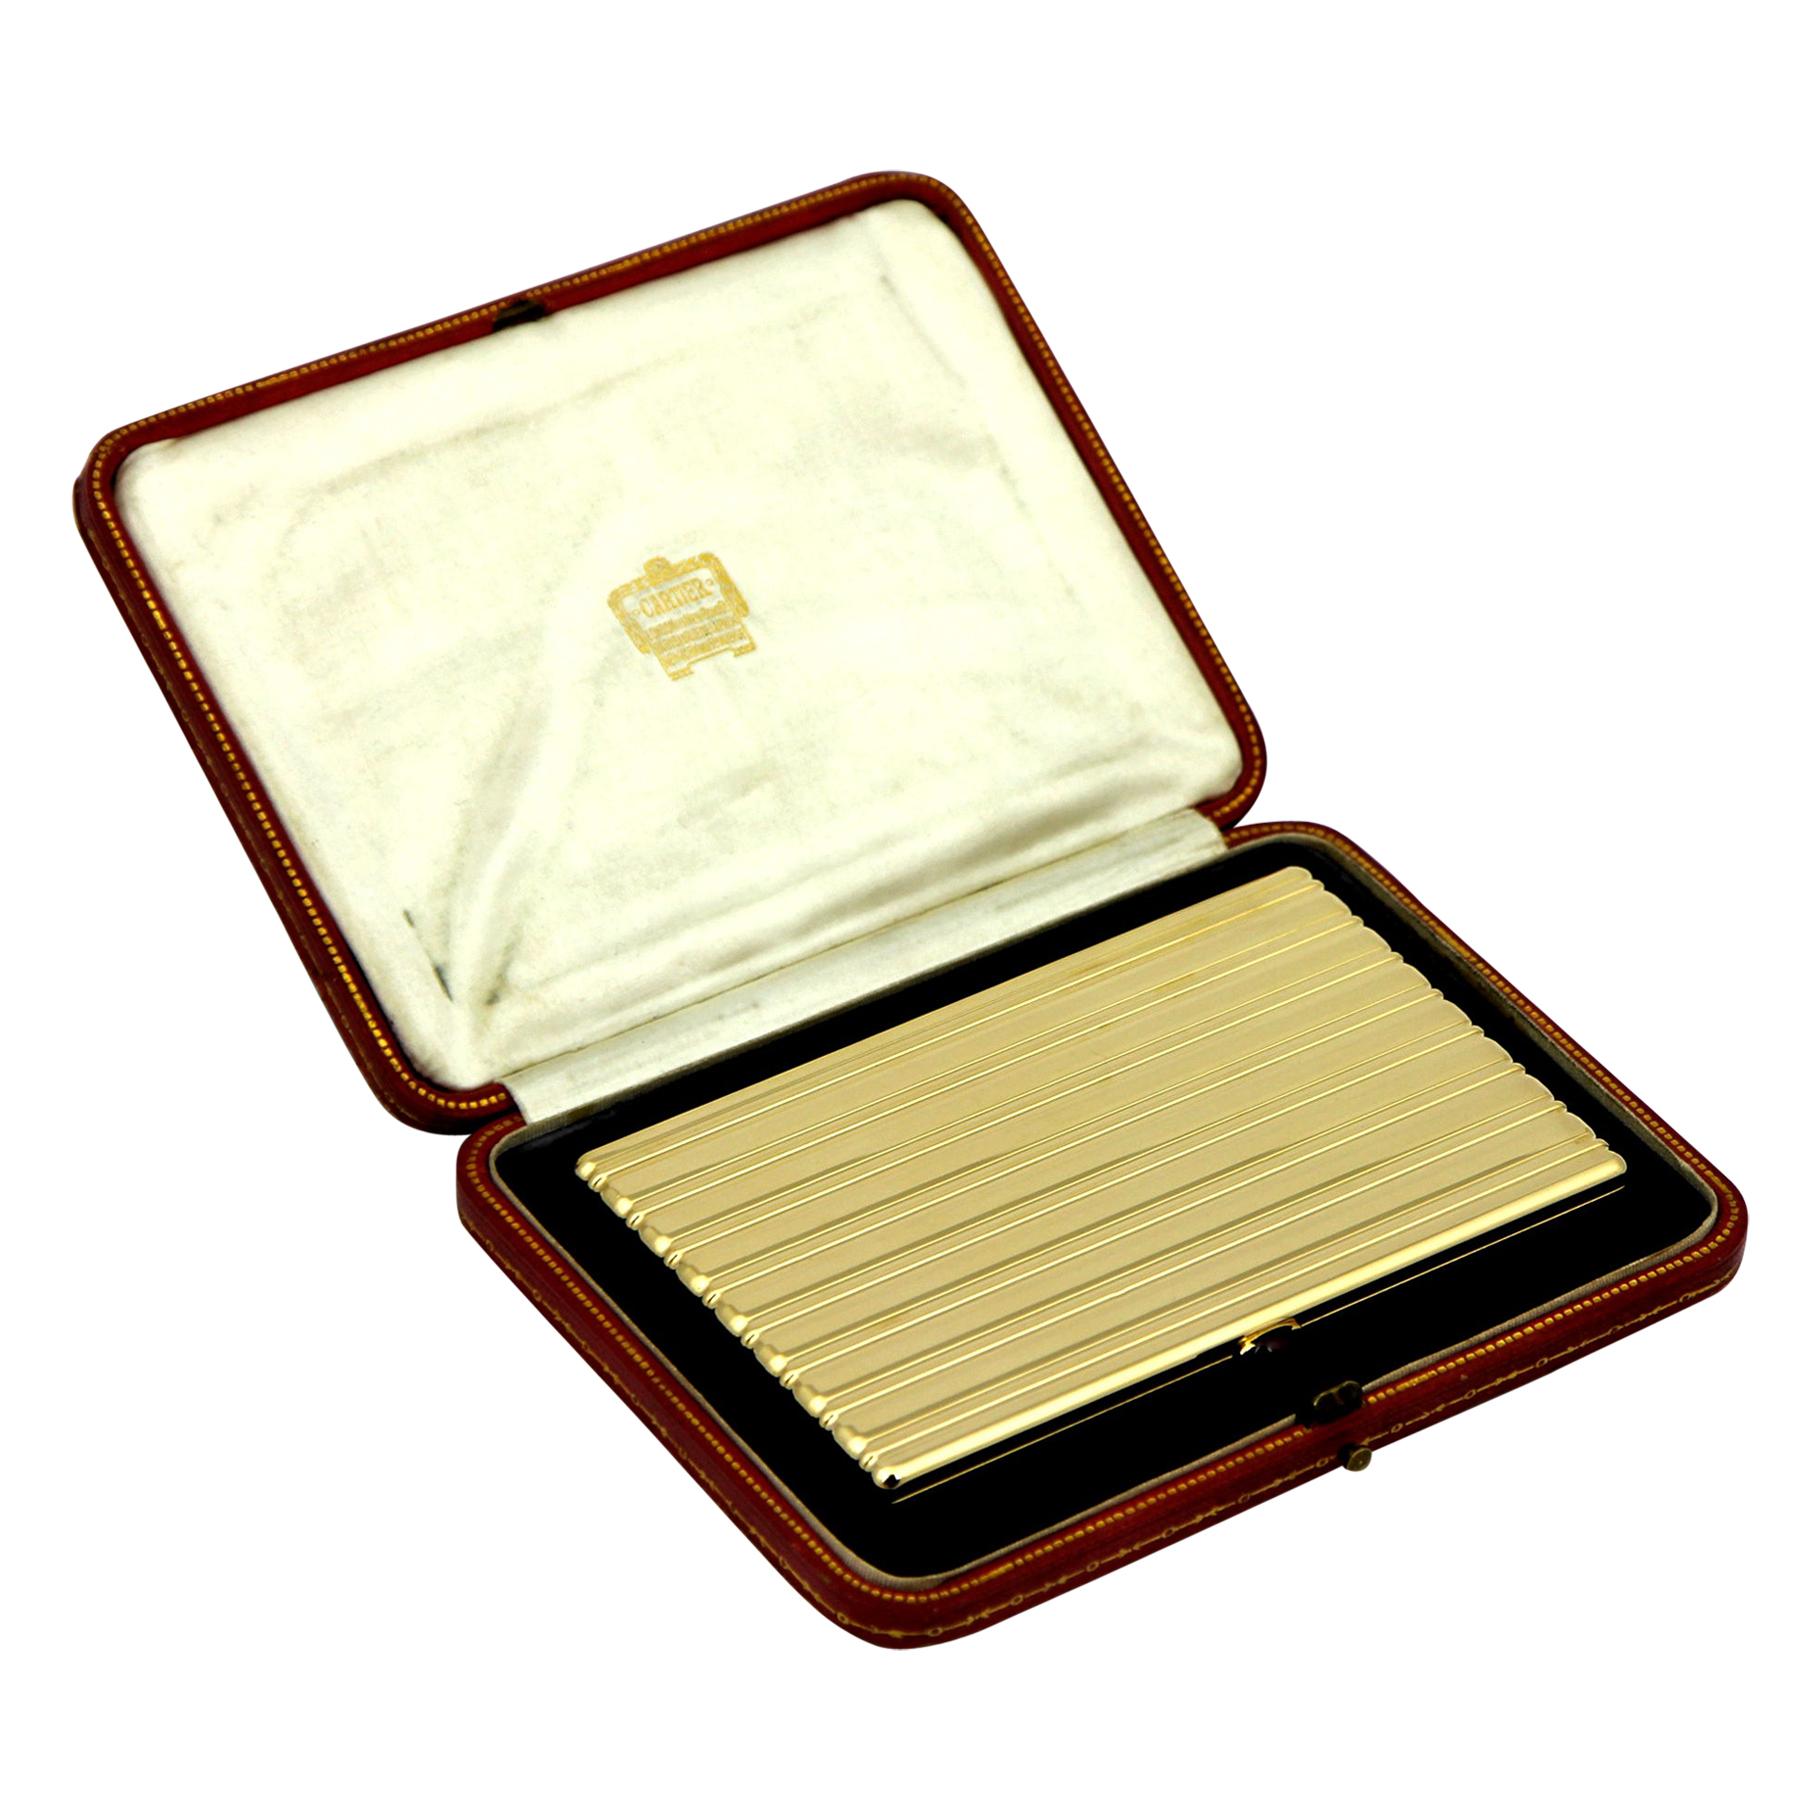 A rectangular 18 karat yellow gold cigarette case, by Cartier, dated 1947, with fitted presentation box. The exterior surface of the case is patterned with undulating horizontal stripes. The push-in ruby cabochon thumb-piece opens the case to reveal